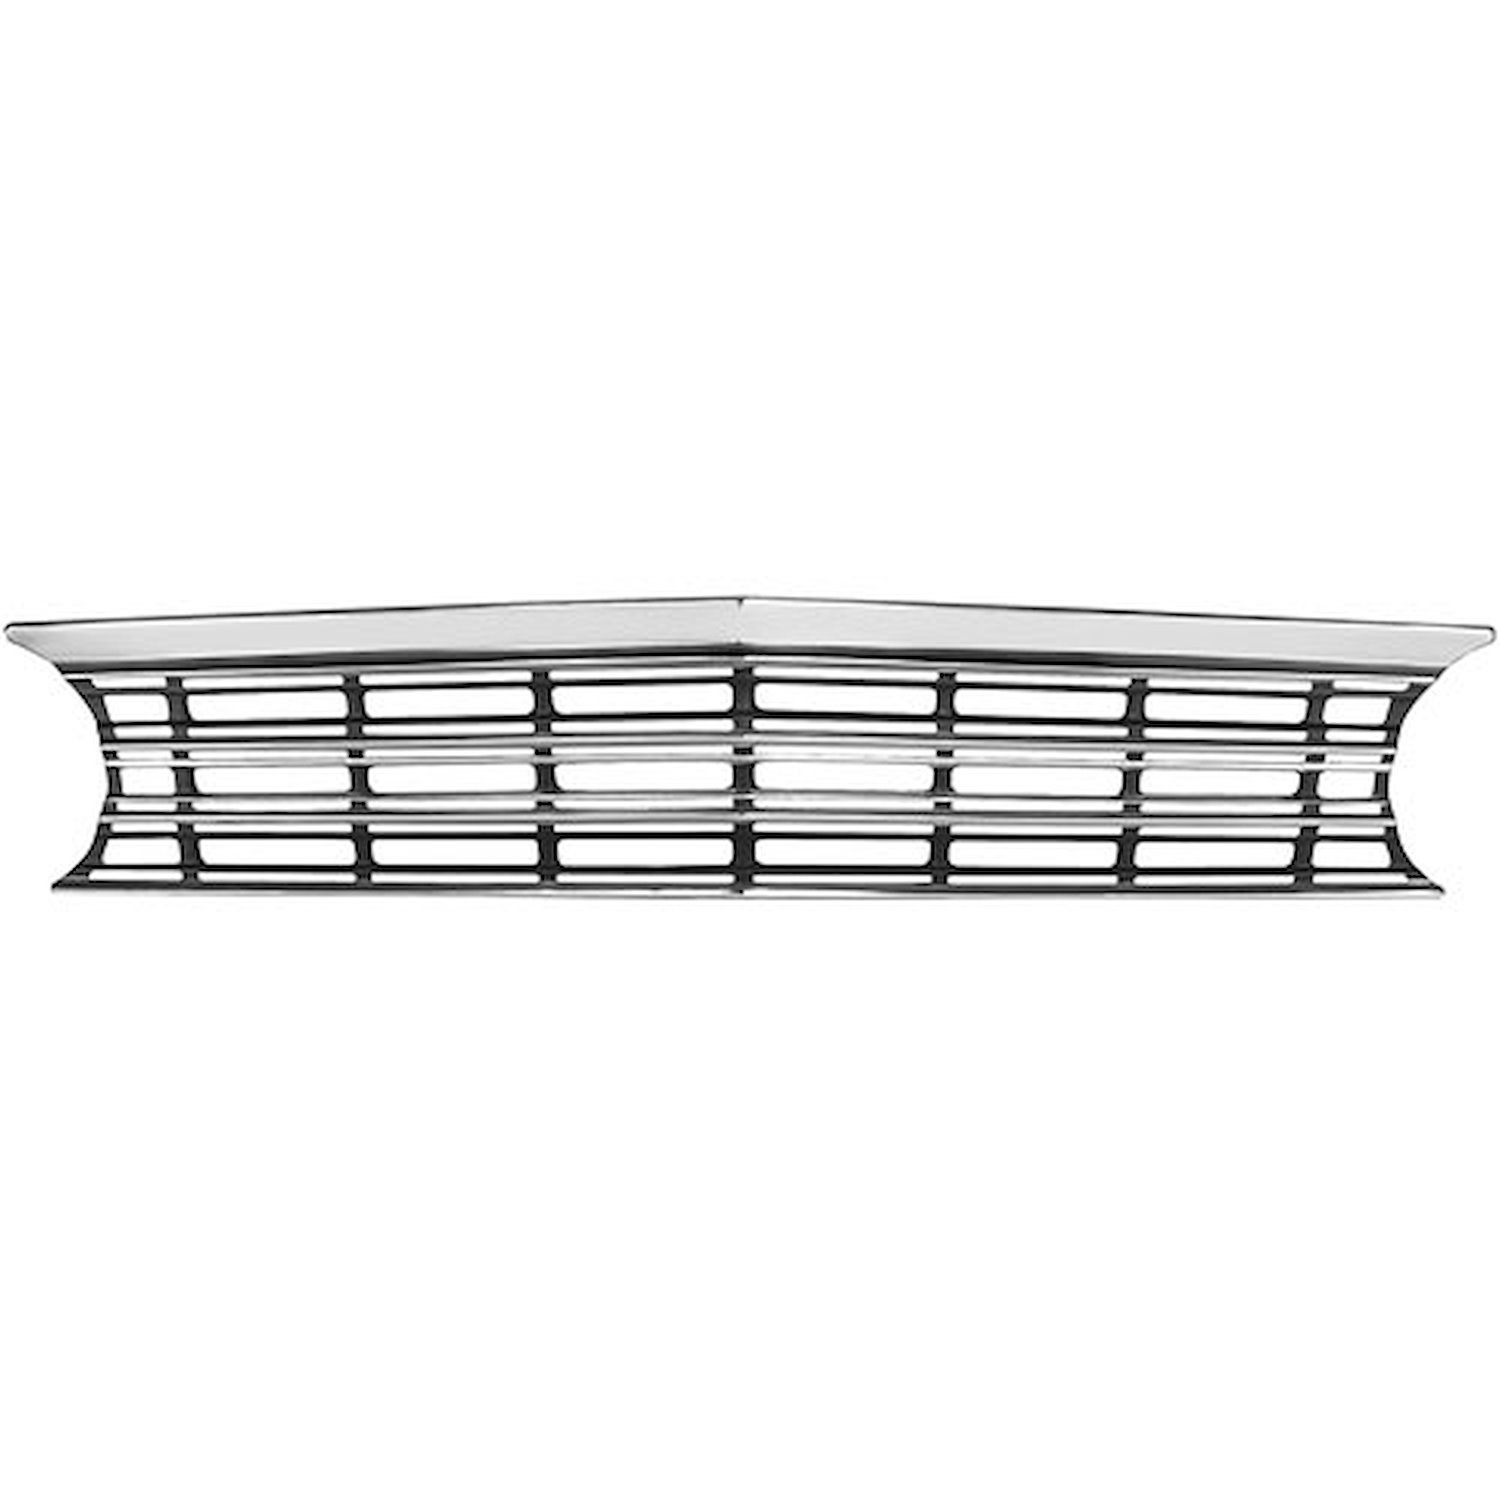 Grille for 1967 Chevy Chevelle SS, El Camino Custom [Aluminum]